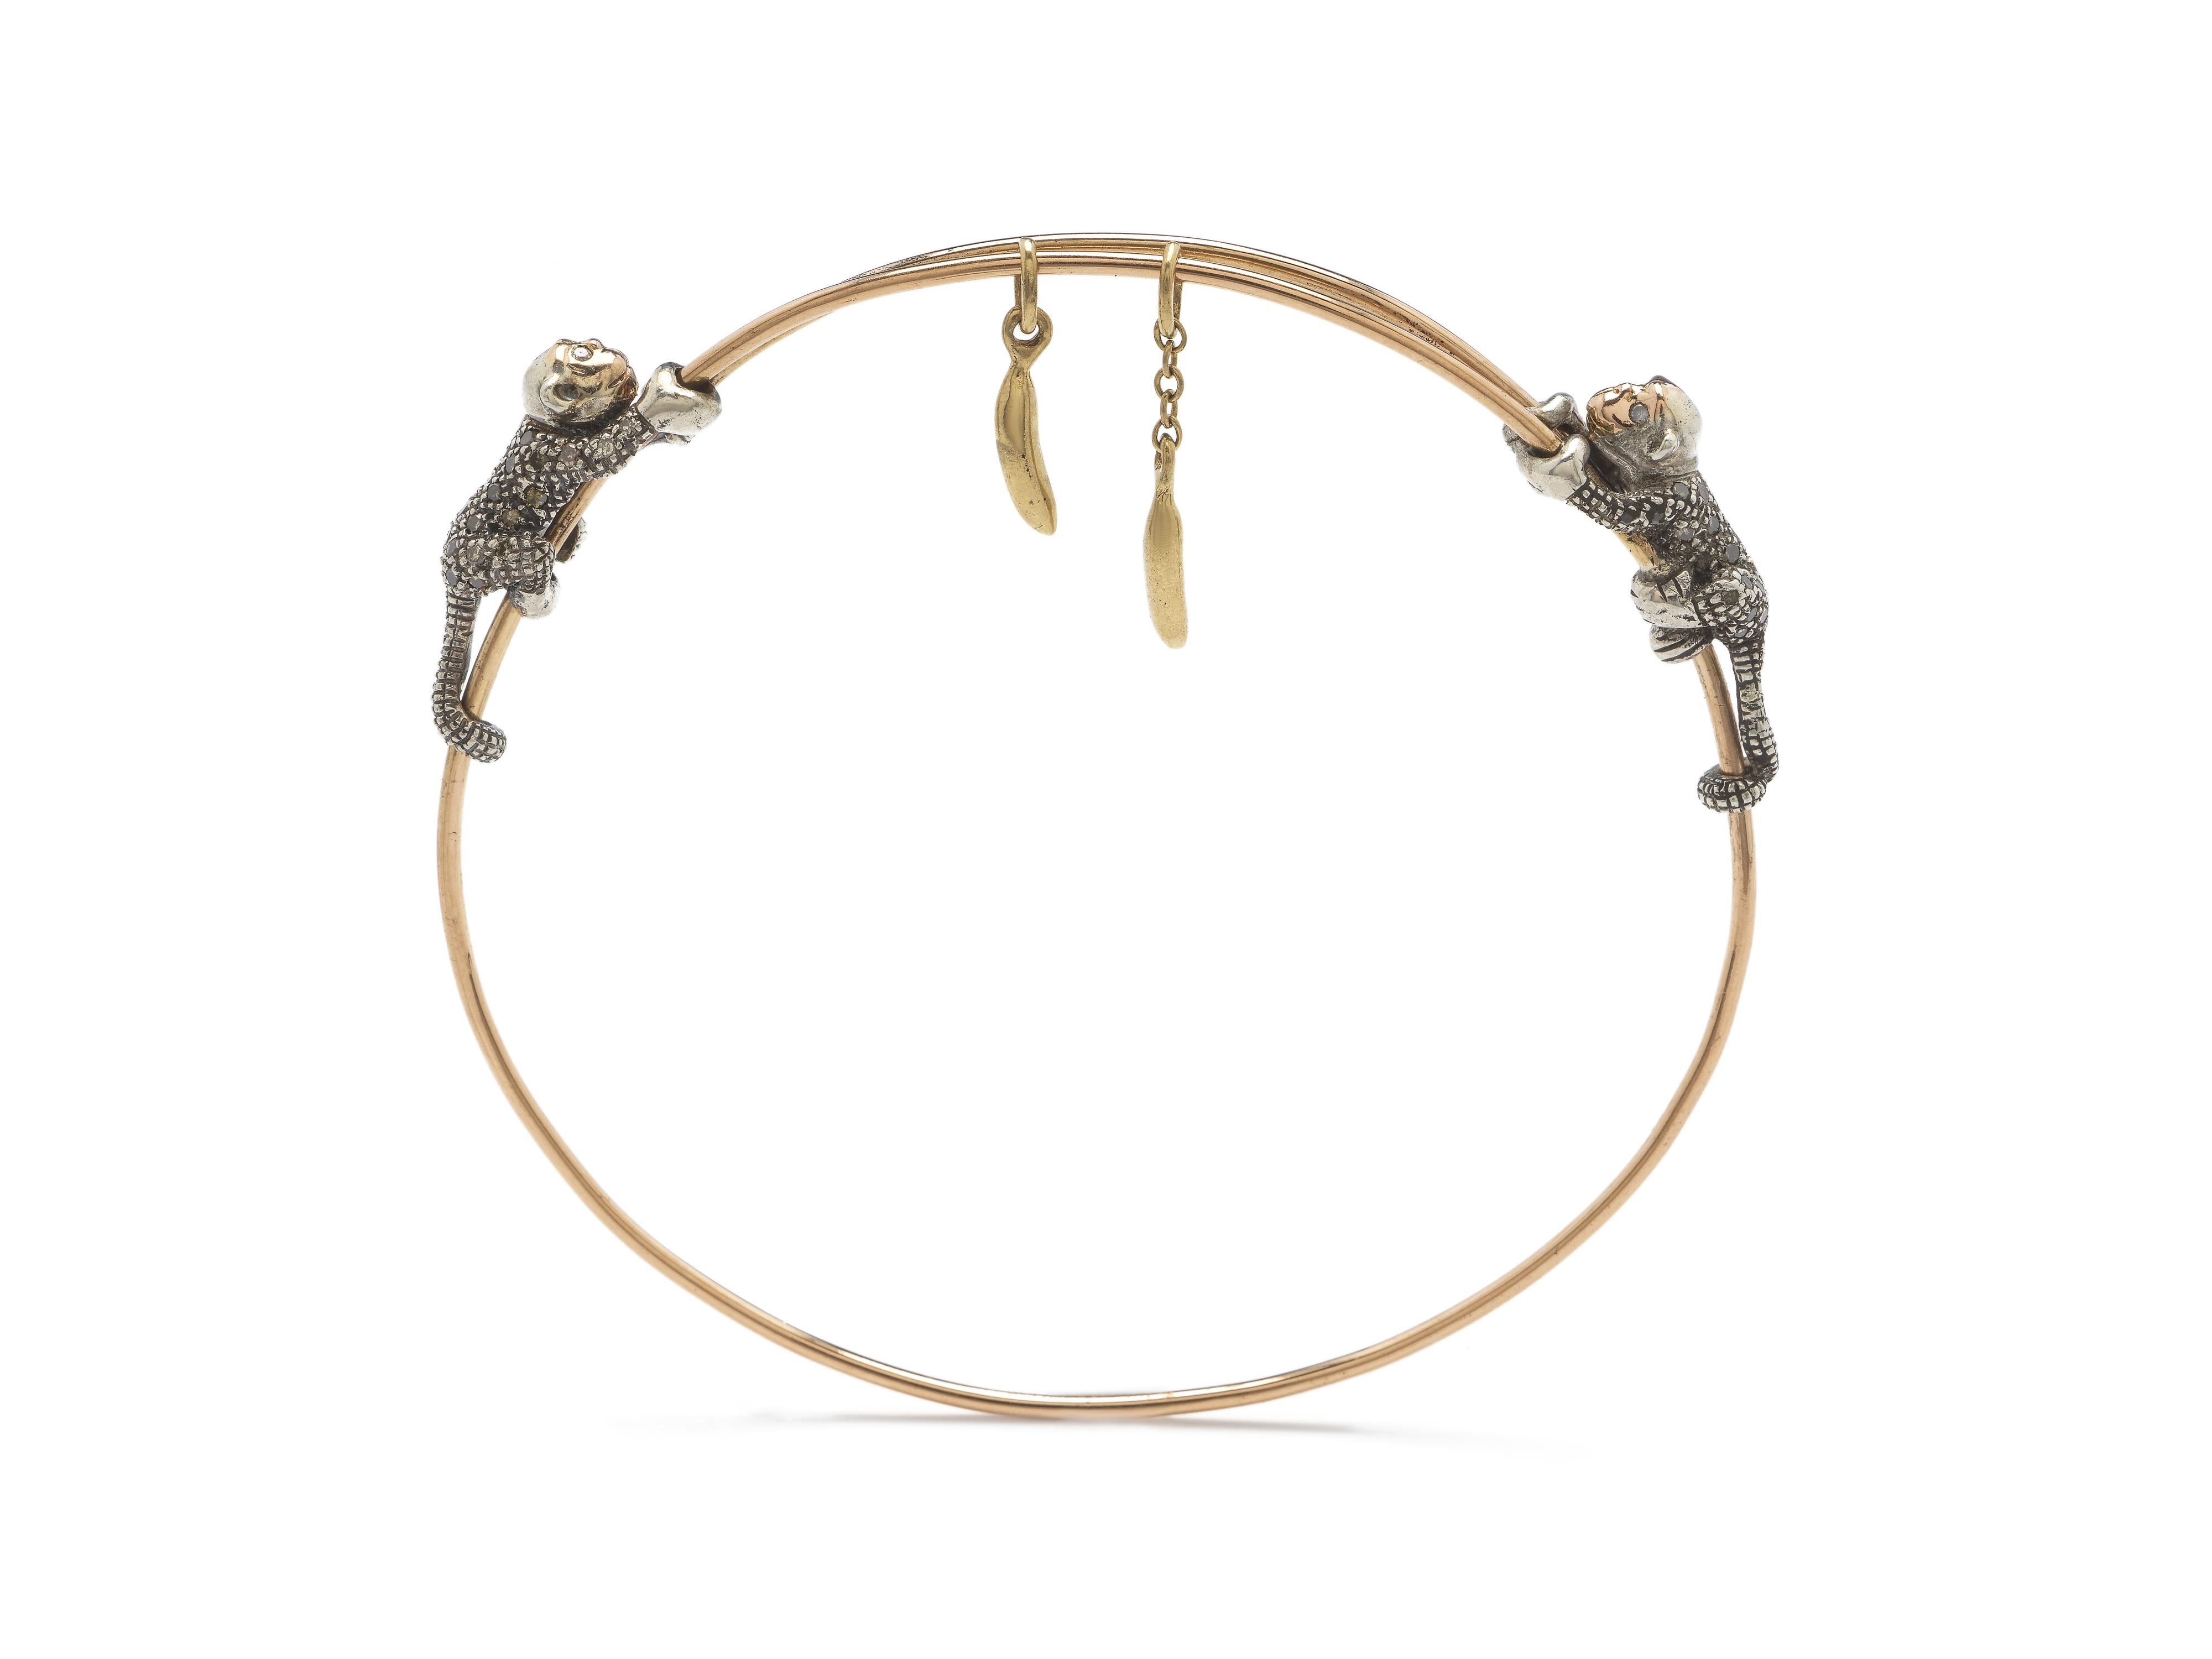 Designed in 18k rose and yellow gold, this fine bangle is set with two 18k rose gold and sterling silver monkeys embellished with brown diamonds, who chase two gold bananas hanging between them. This bracelet’s fitting on the wrist can be adjusted,